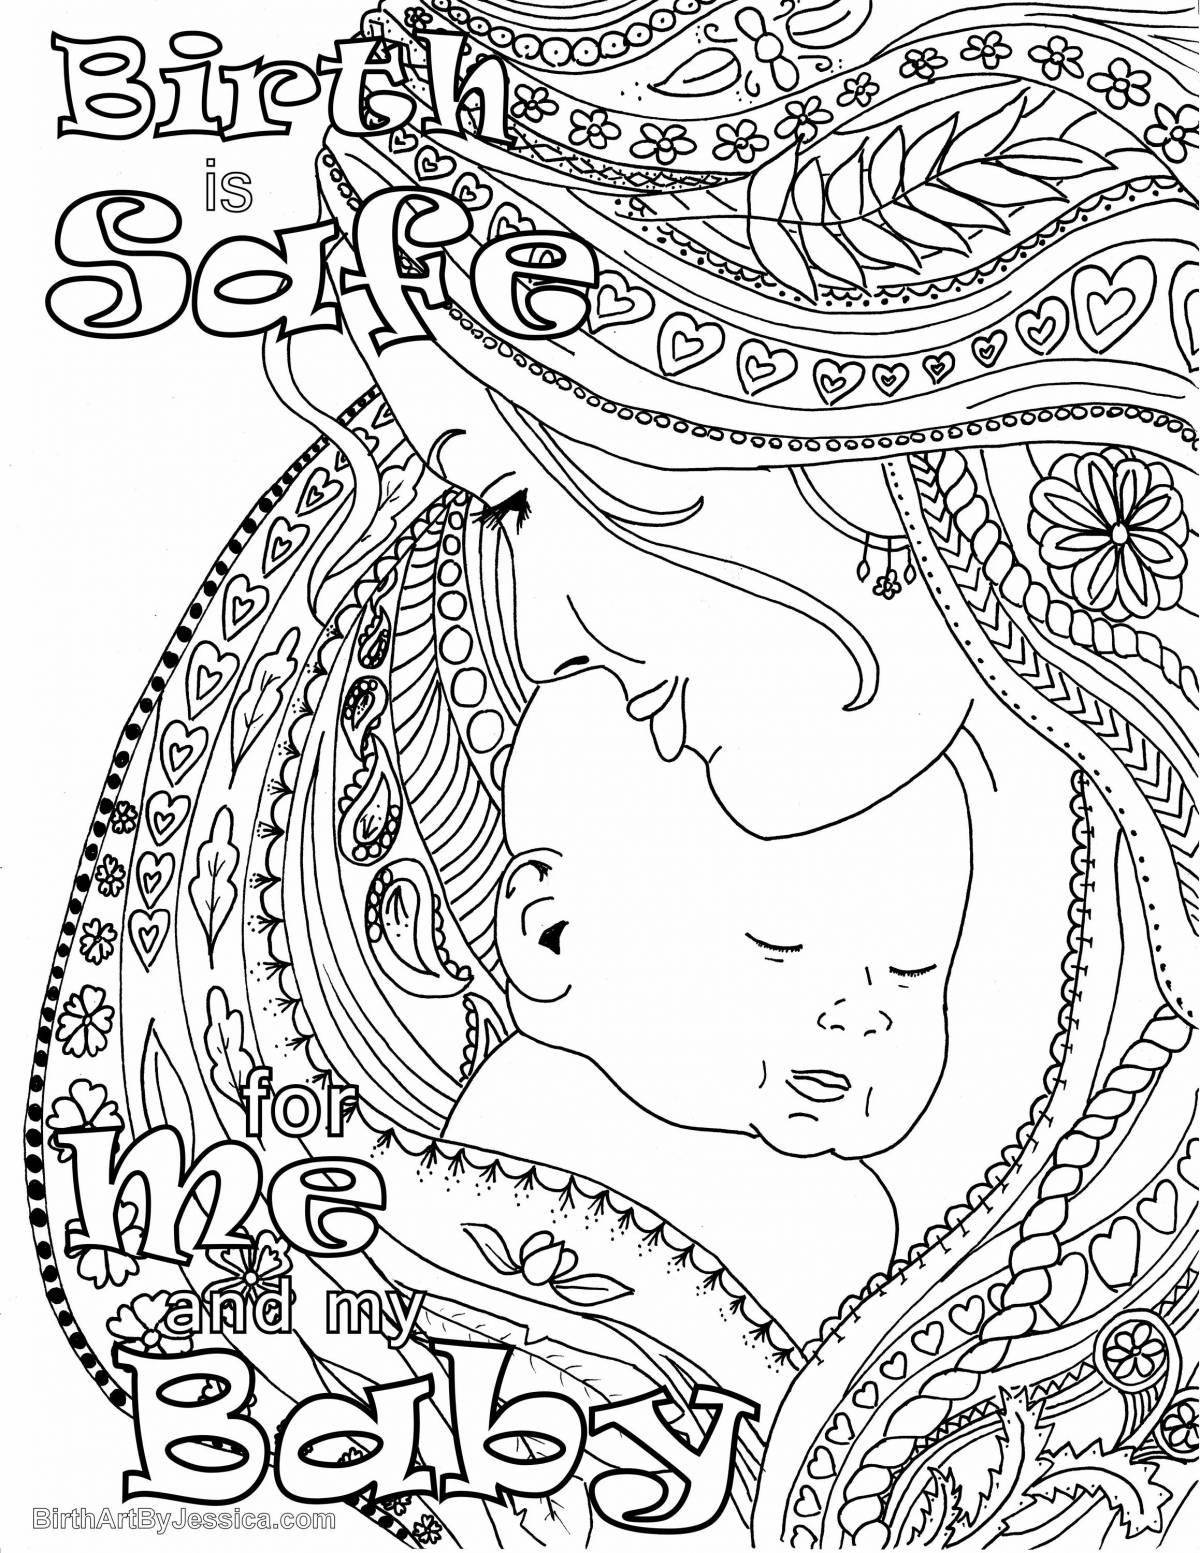 Serene pregnancy coloring page